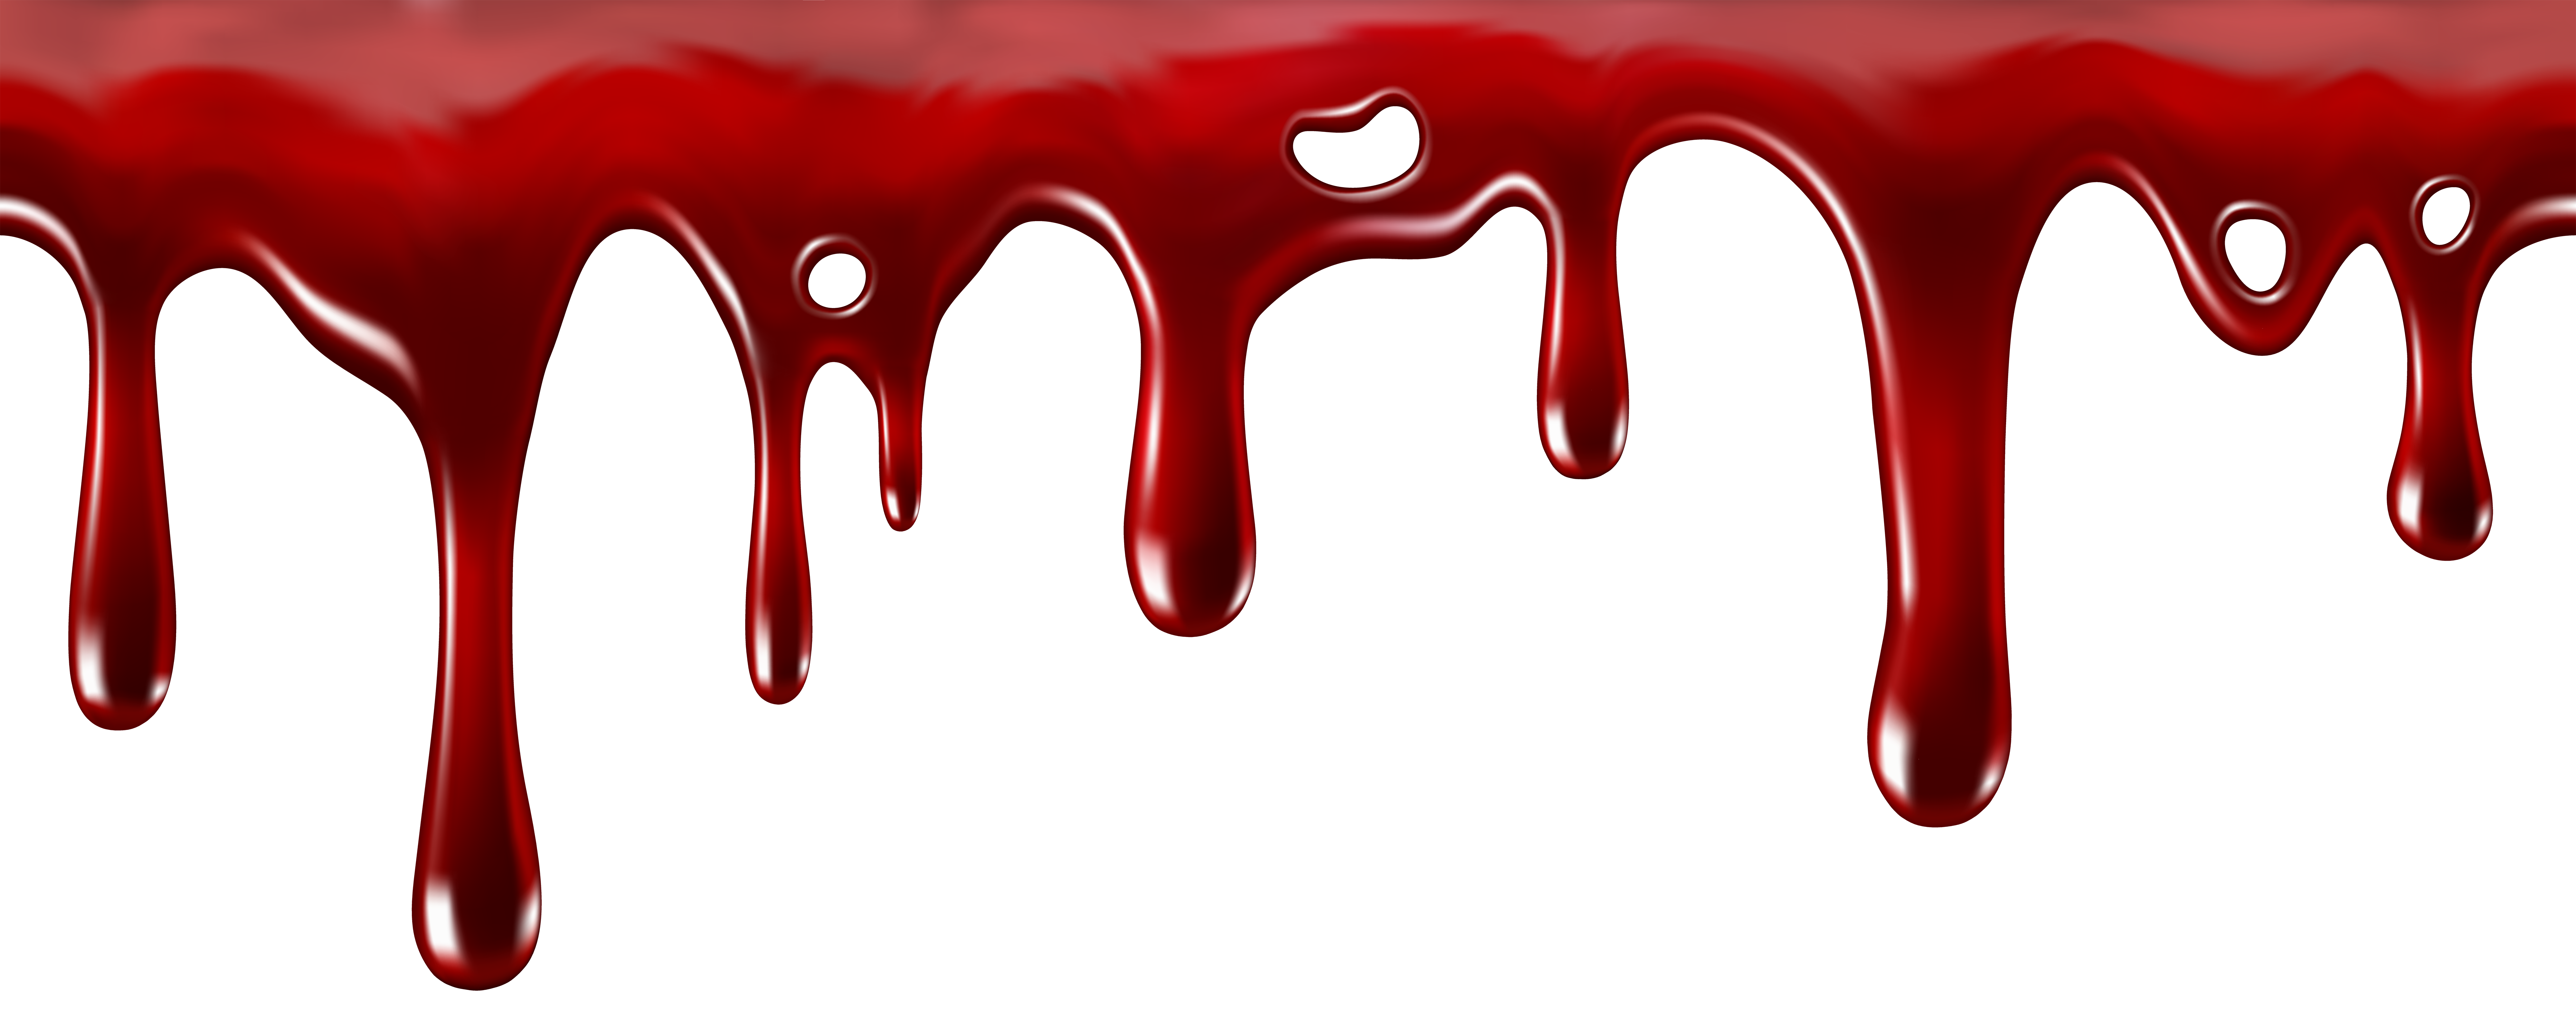 BLOOD_DRIPPING.png - 3.29 MB